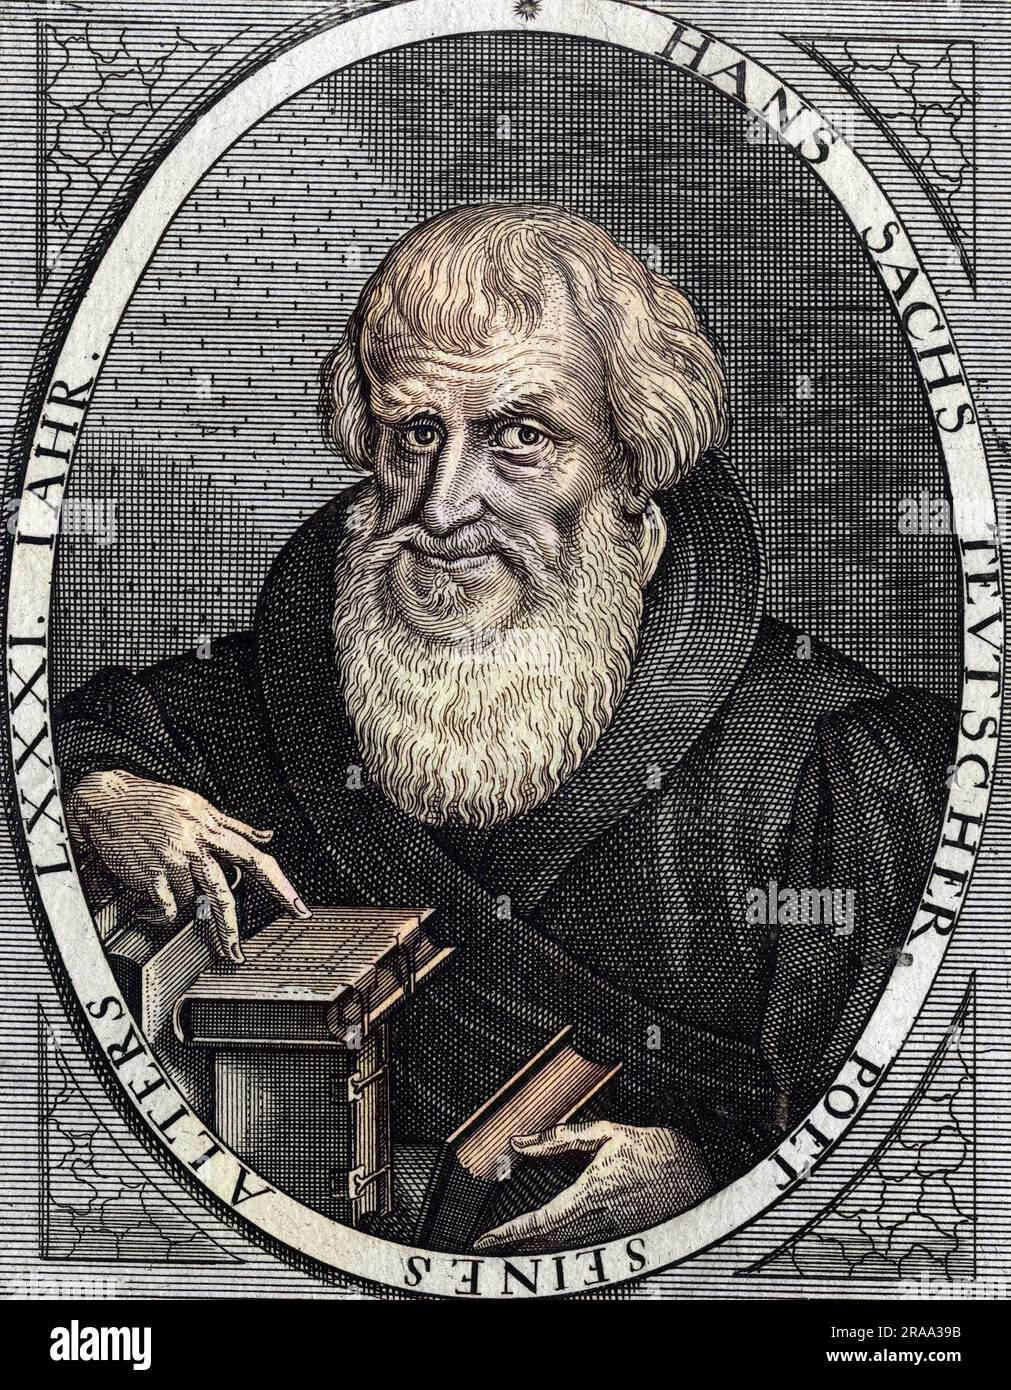 HANS SACHS (1494 - 1576), German shoemaker, poet and meistersinger from Nurnberg, author of 6000+ works, a supporter of Luther and the Reformation. Stock Photo